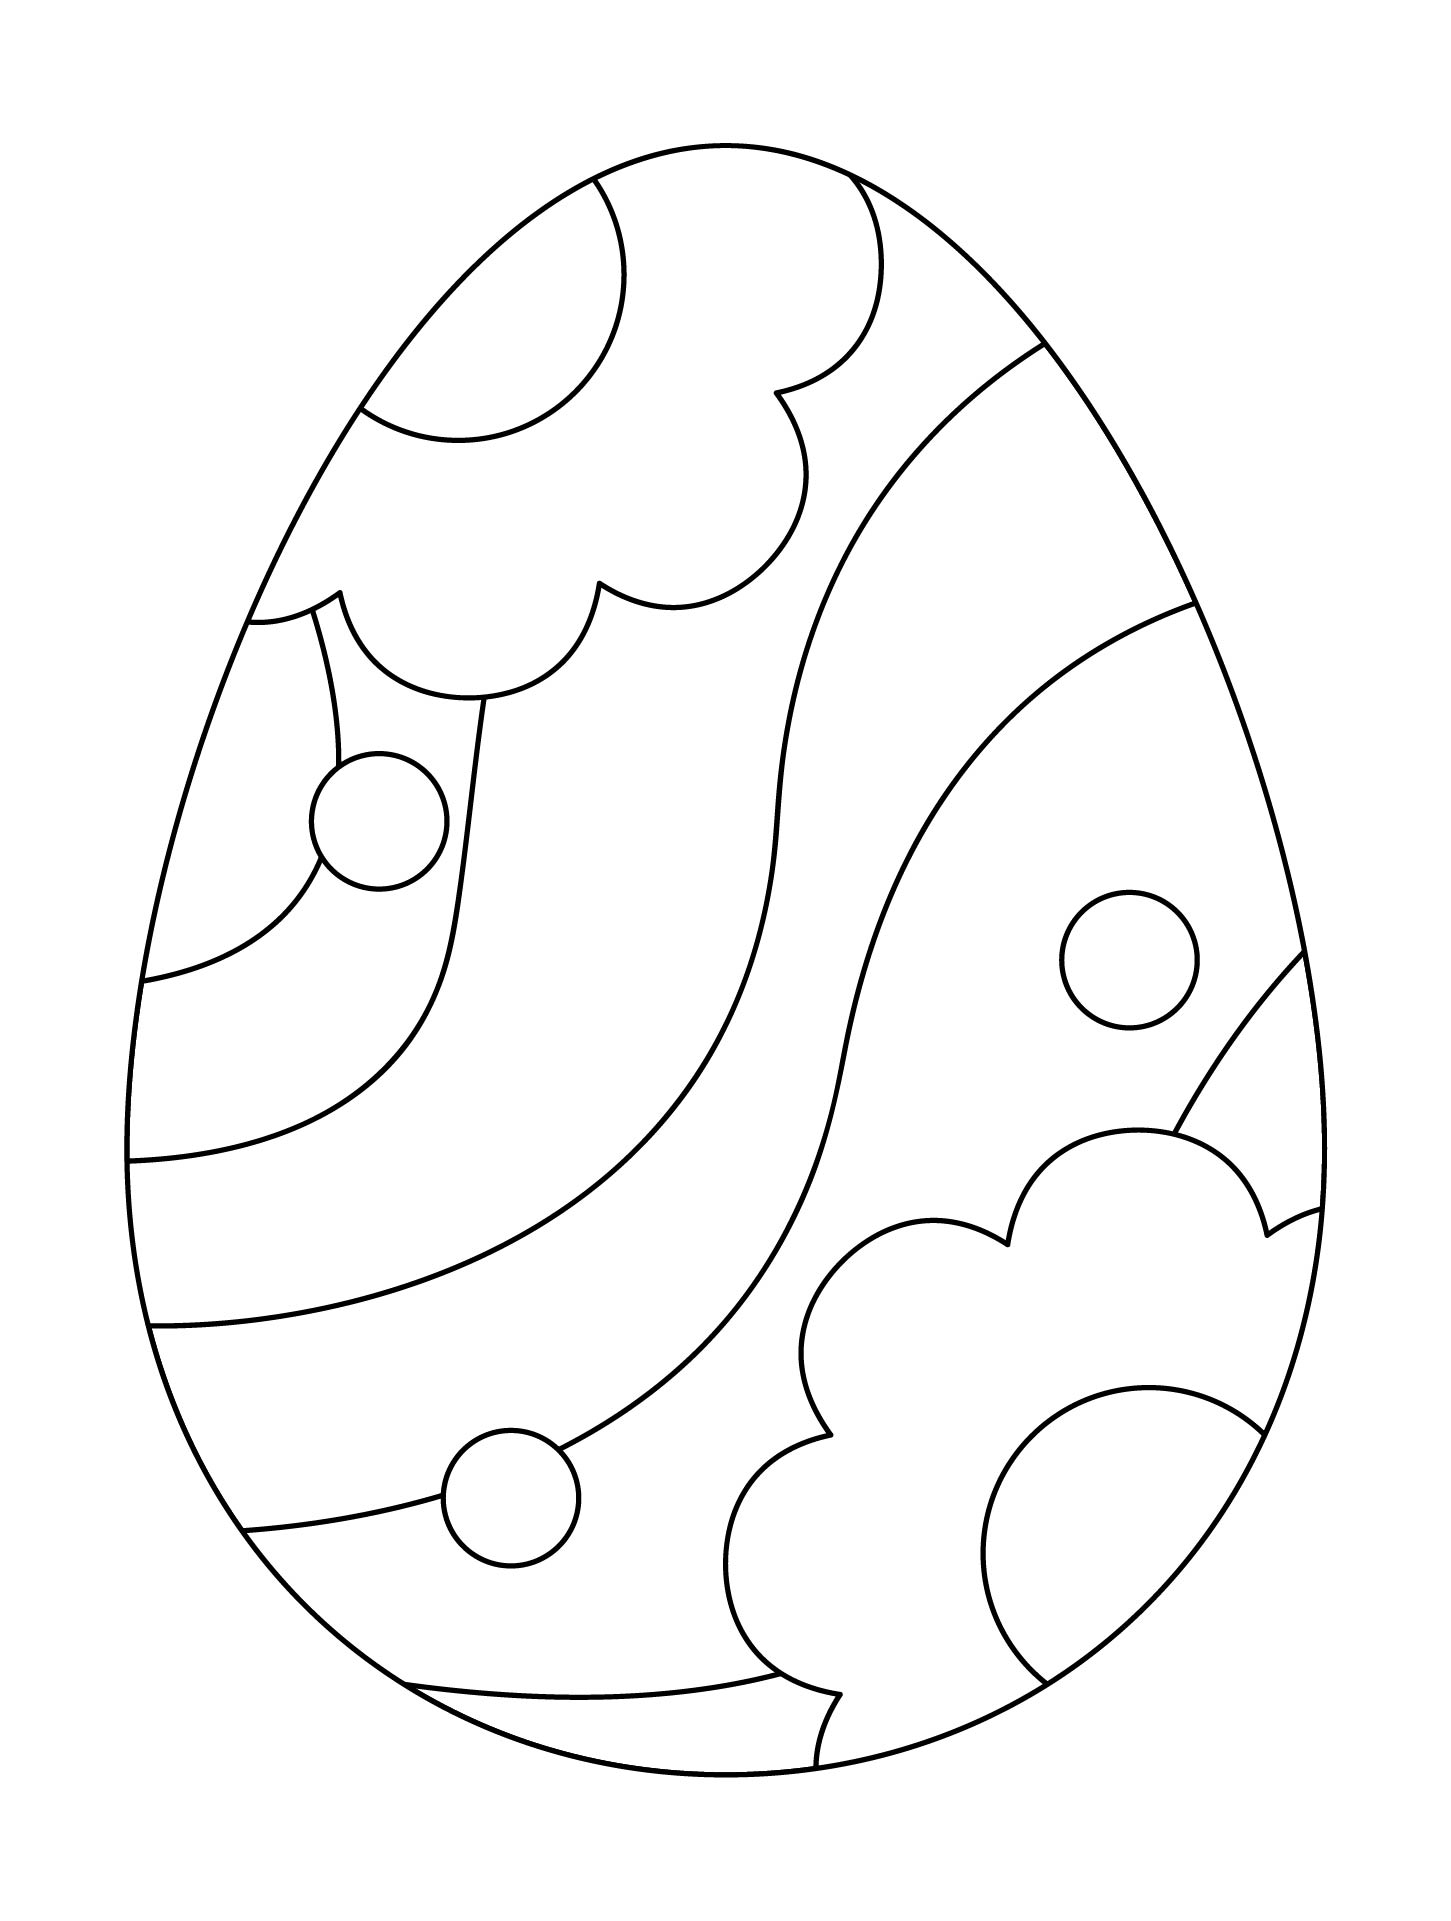 Printable Easter Egg Coloring Page